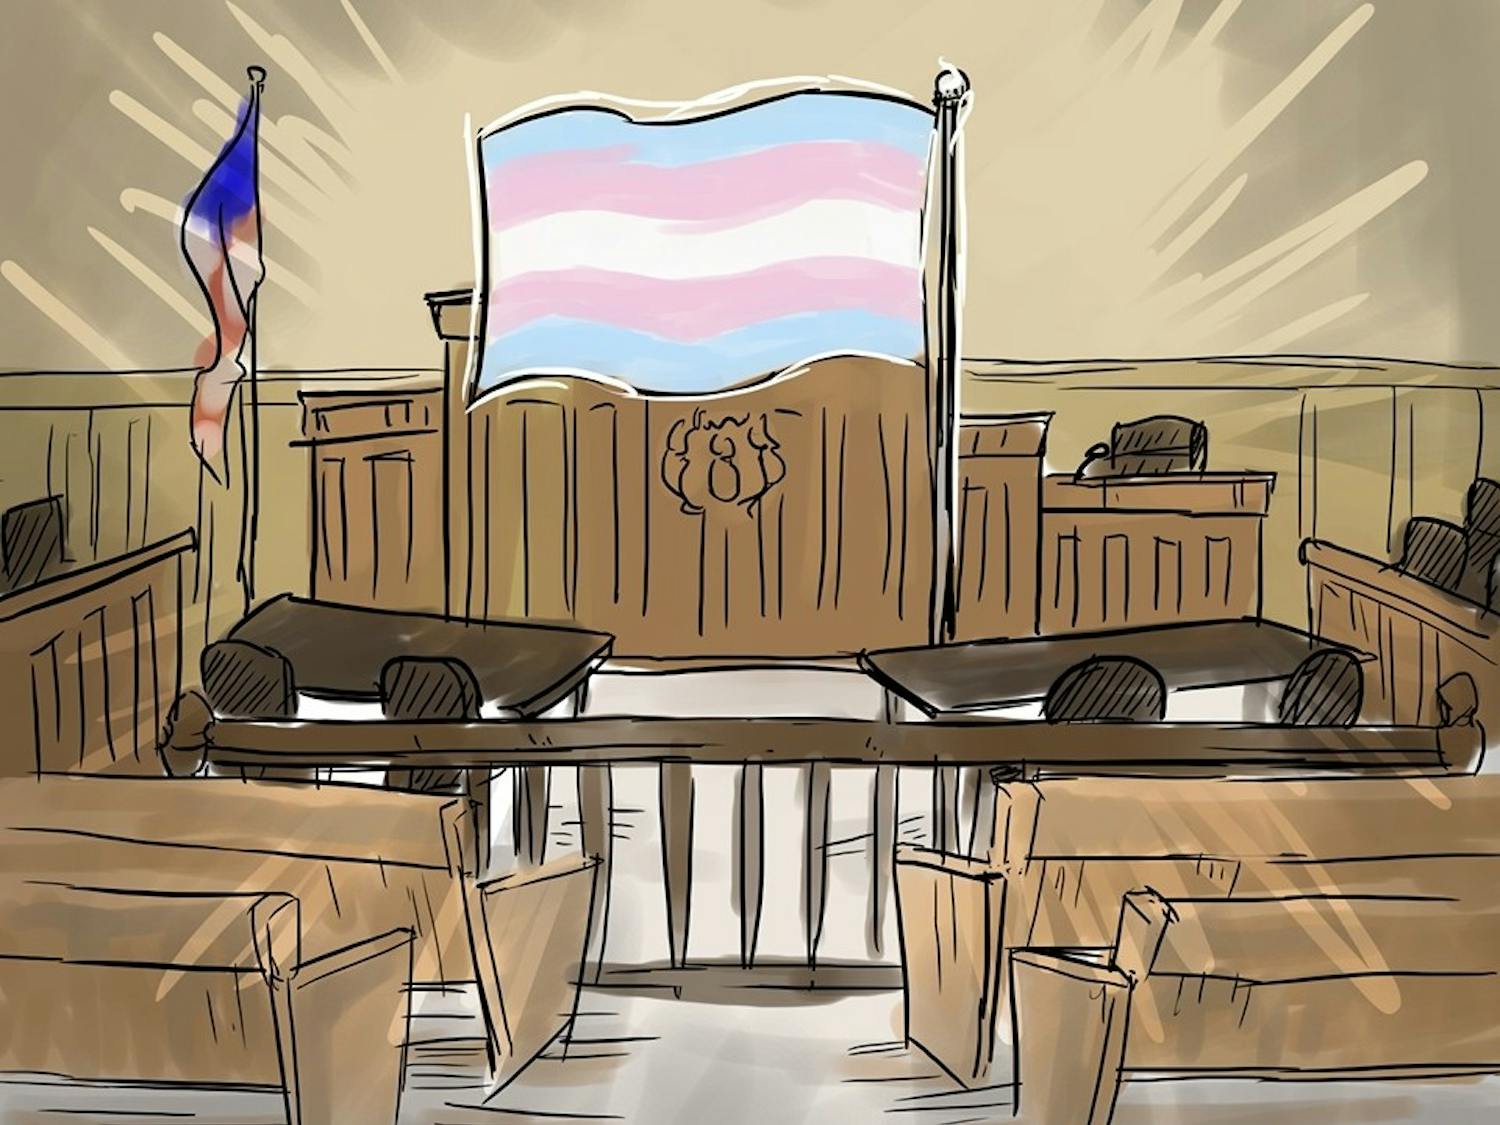 Two transgender women were awarded $780,000 in damages after the state refused to pay for their health care.